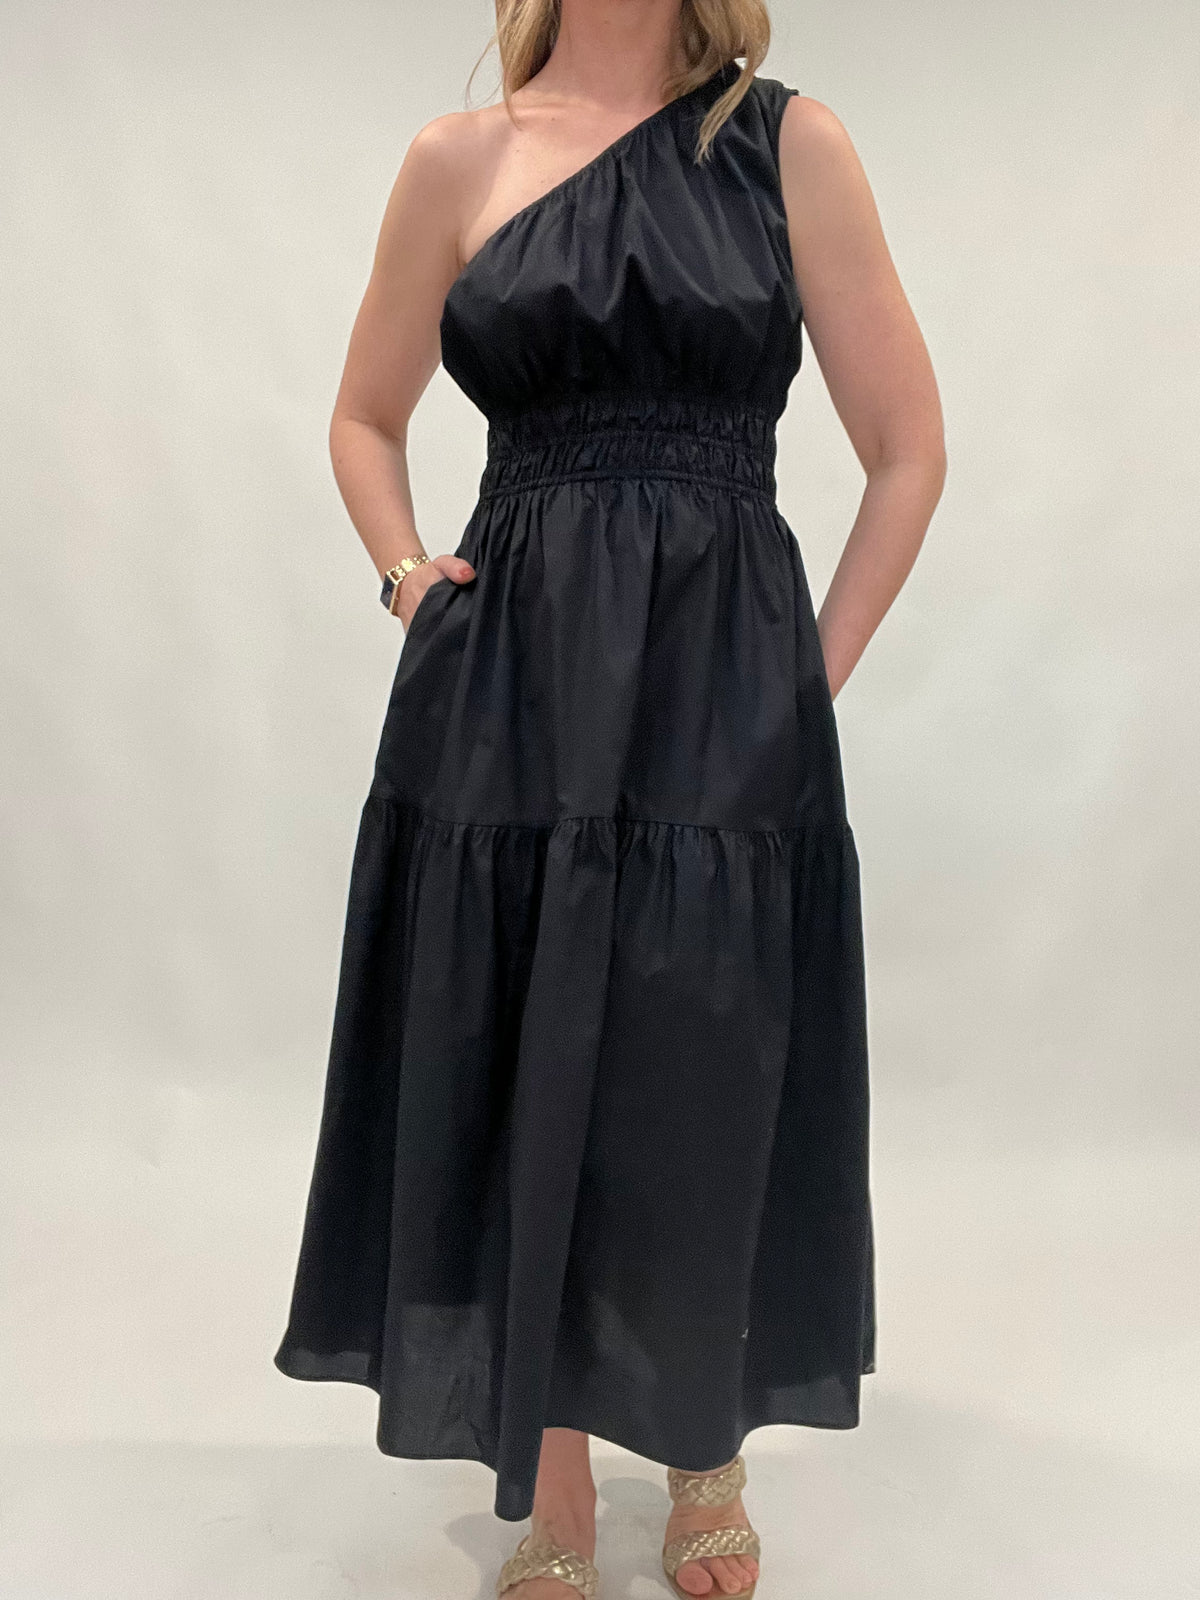 Indulge in luxury with our Best Day Black Poplin Dress. Made with 100% cotton poplin, this single shoulder dress provides wide coverage and features convenient pockets. The tiered skirt, along with the ruche on the waist, adds a touch of sophistication. Elevate your wardrobe with this exclusive and elegant dress.